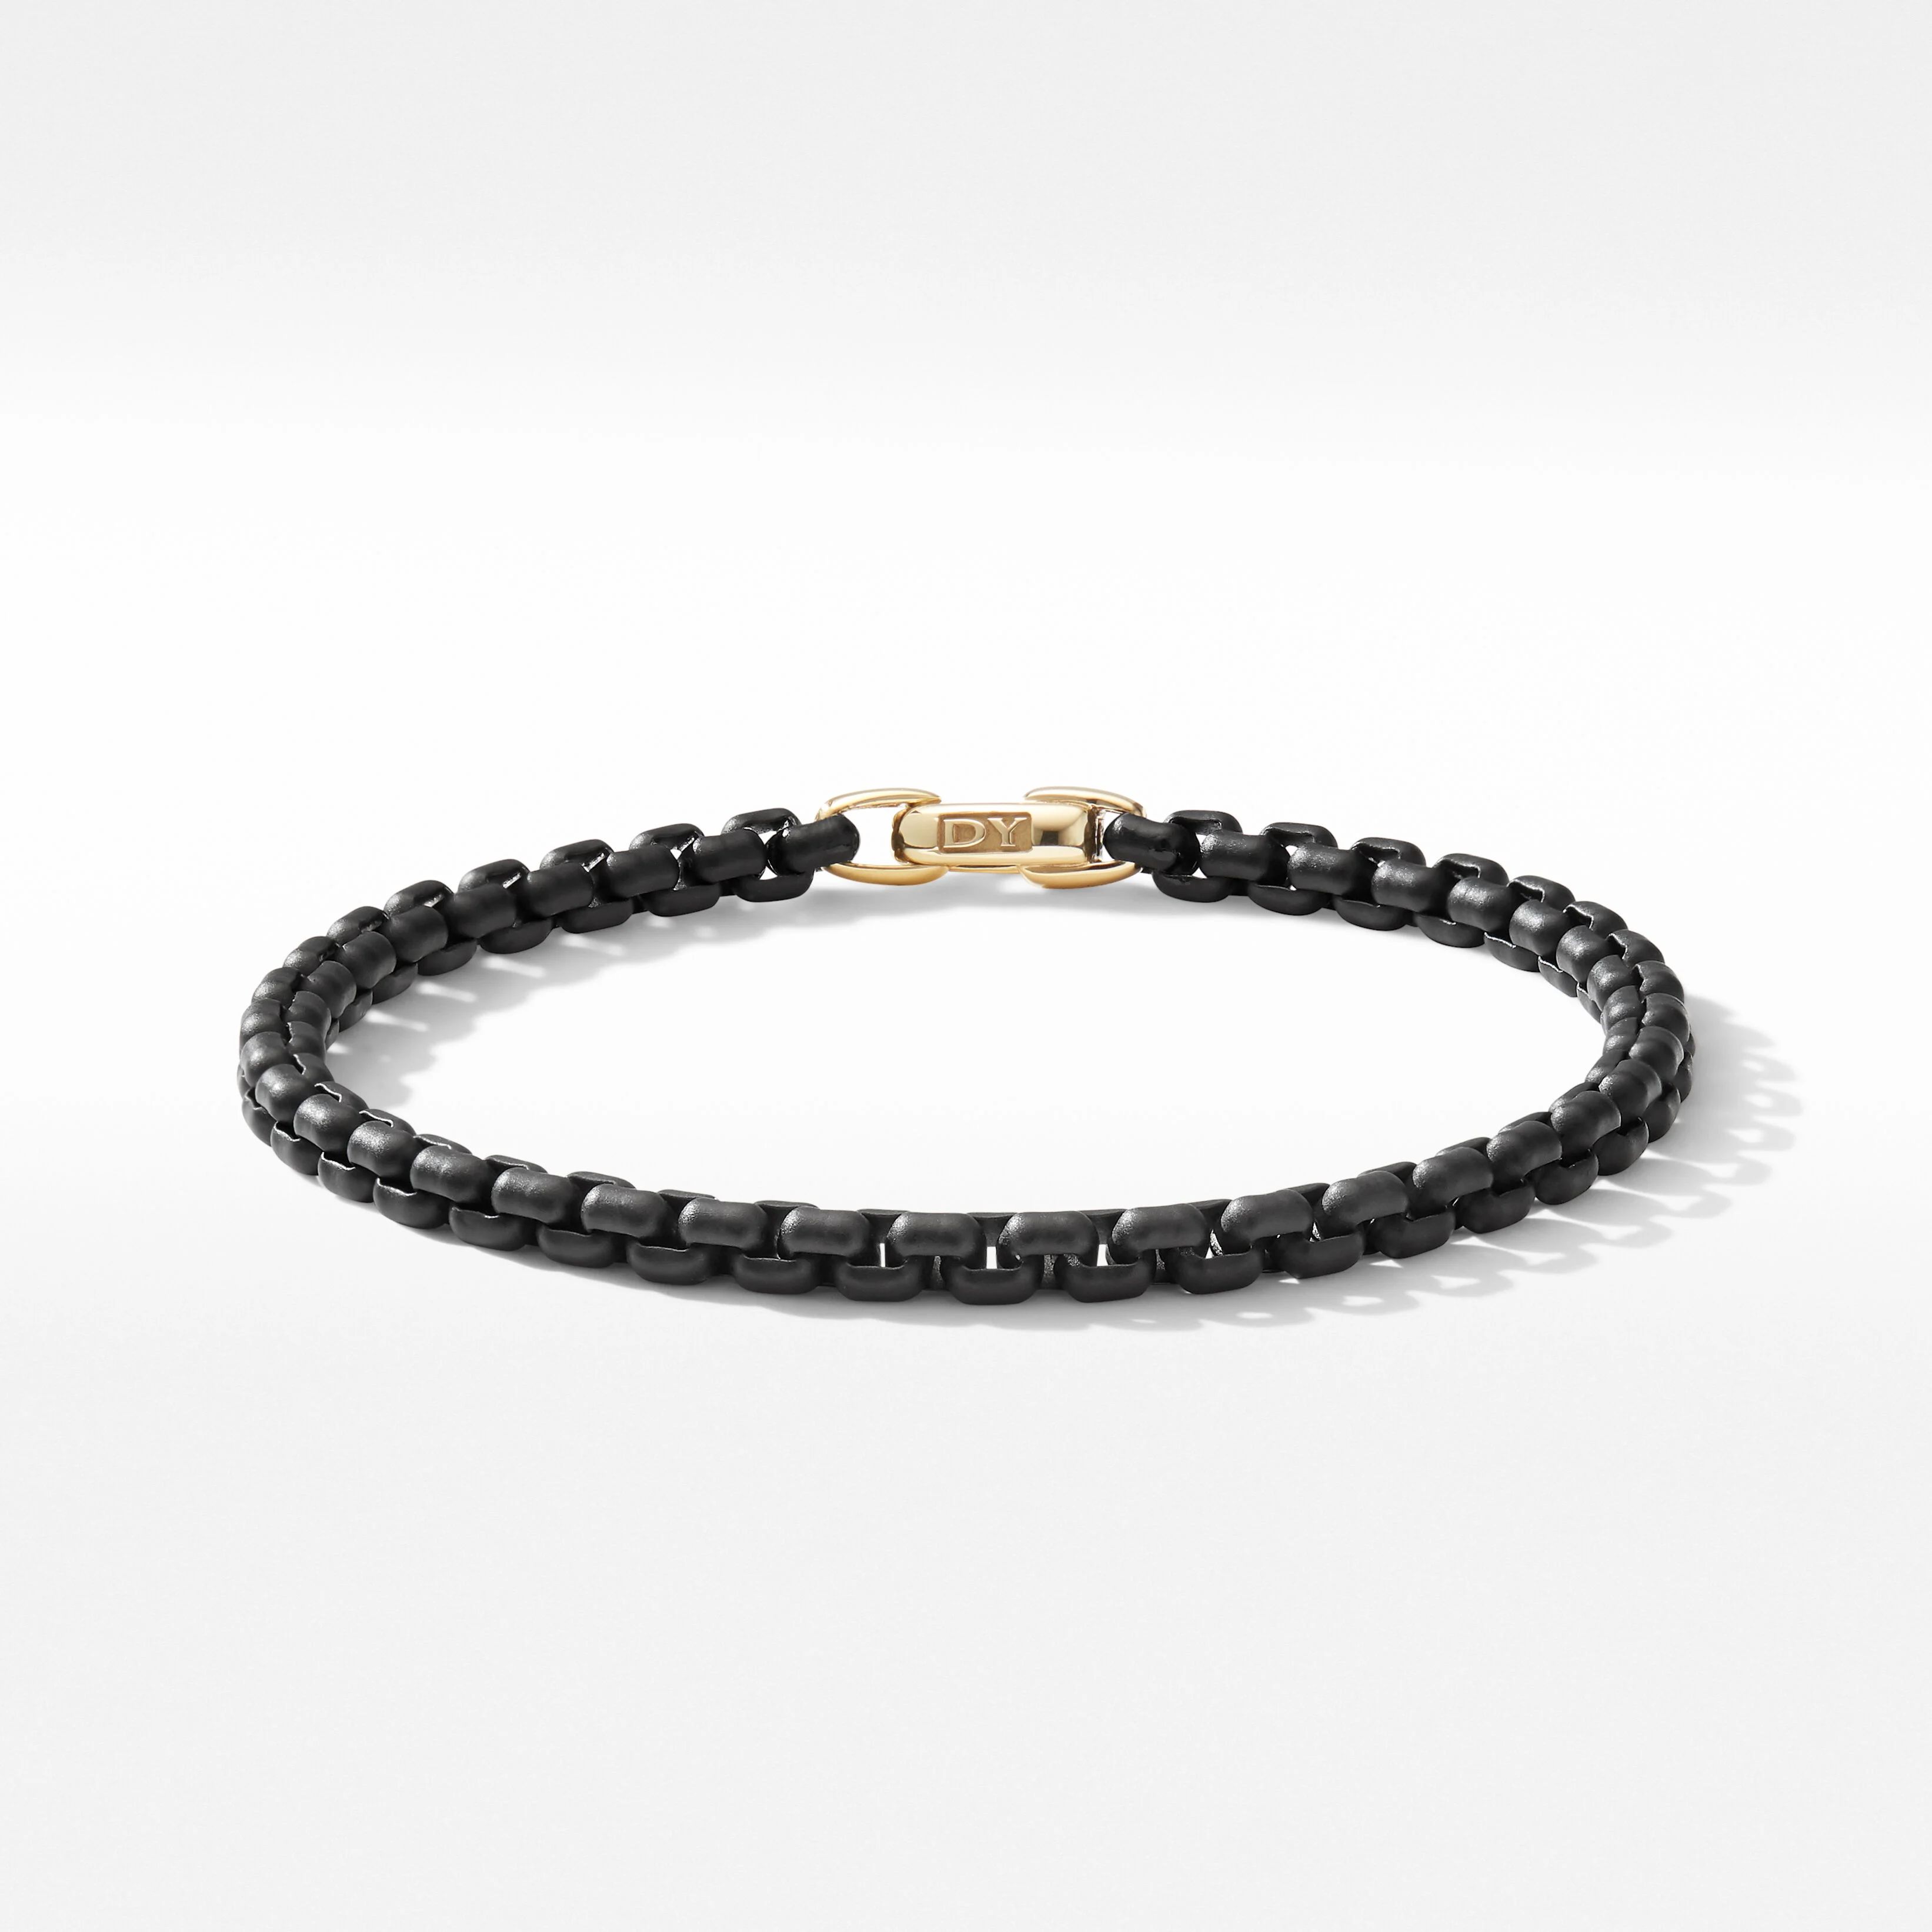 DY Bel Aire Chain Bracelet in Black with 14K Yellow Gold Accent | David Yurman